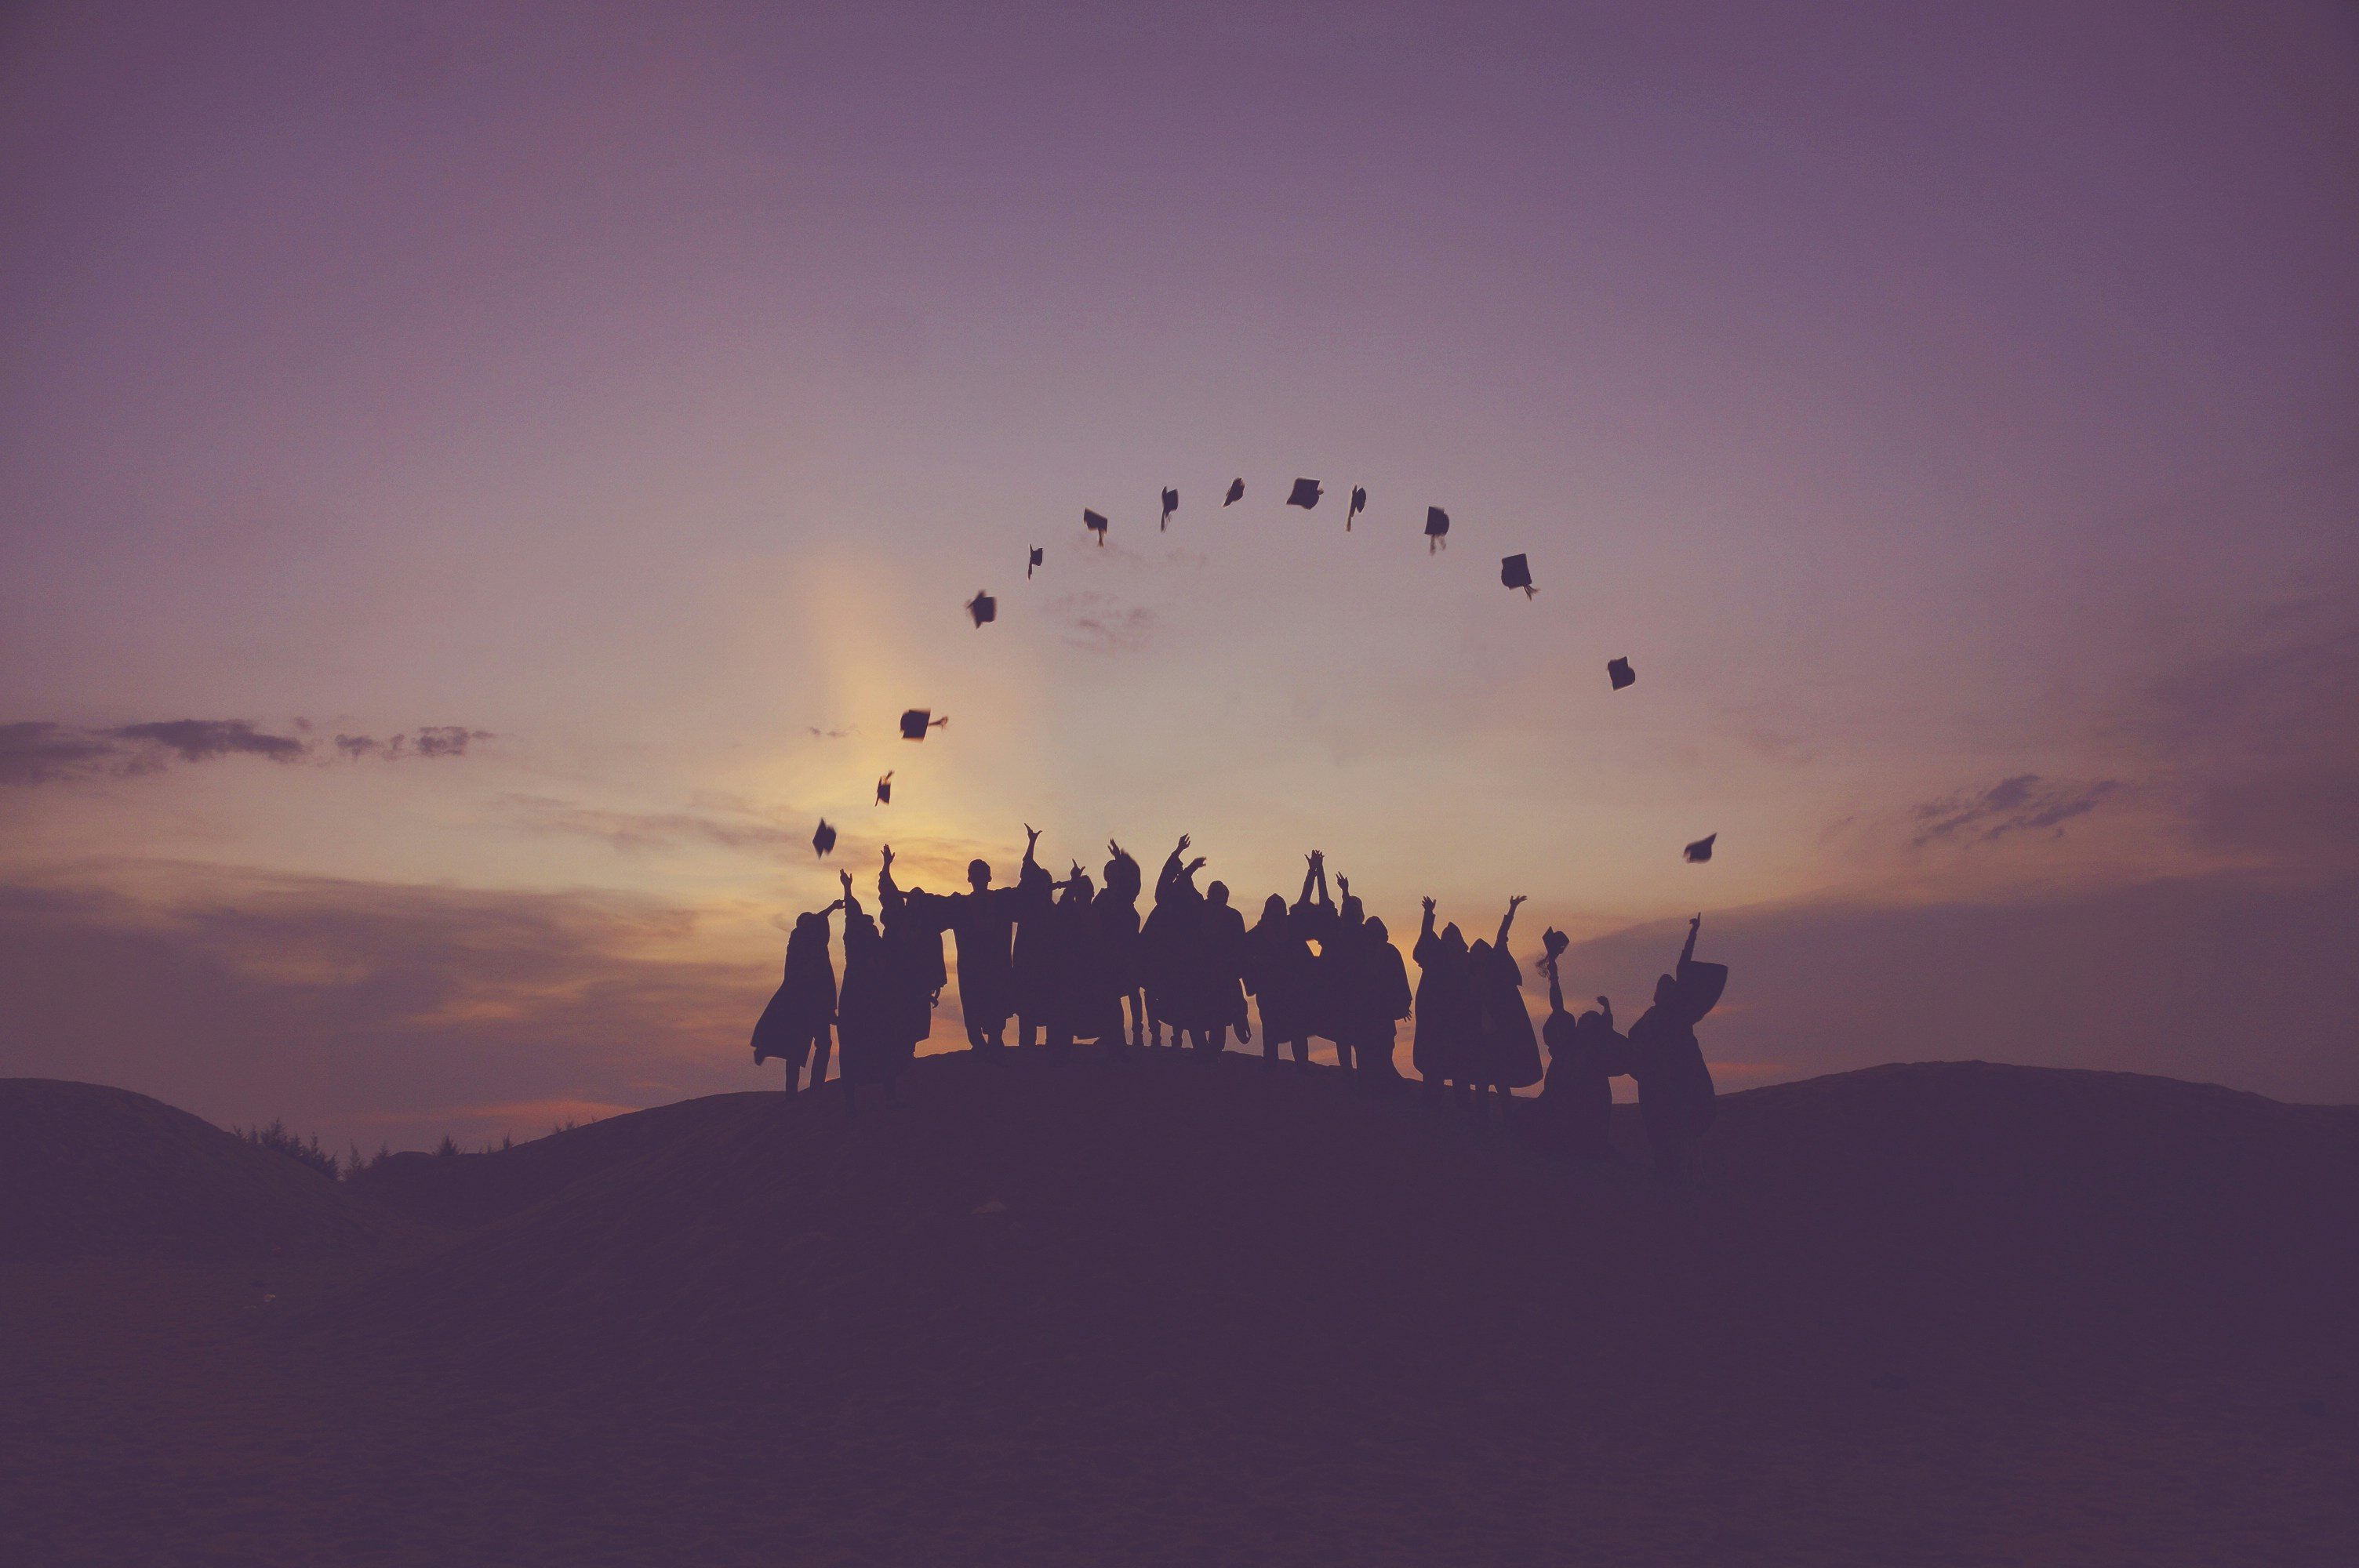 As group of graduates celebrating their achievement at sunset